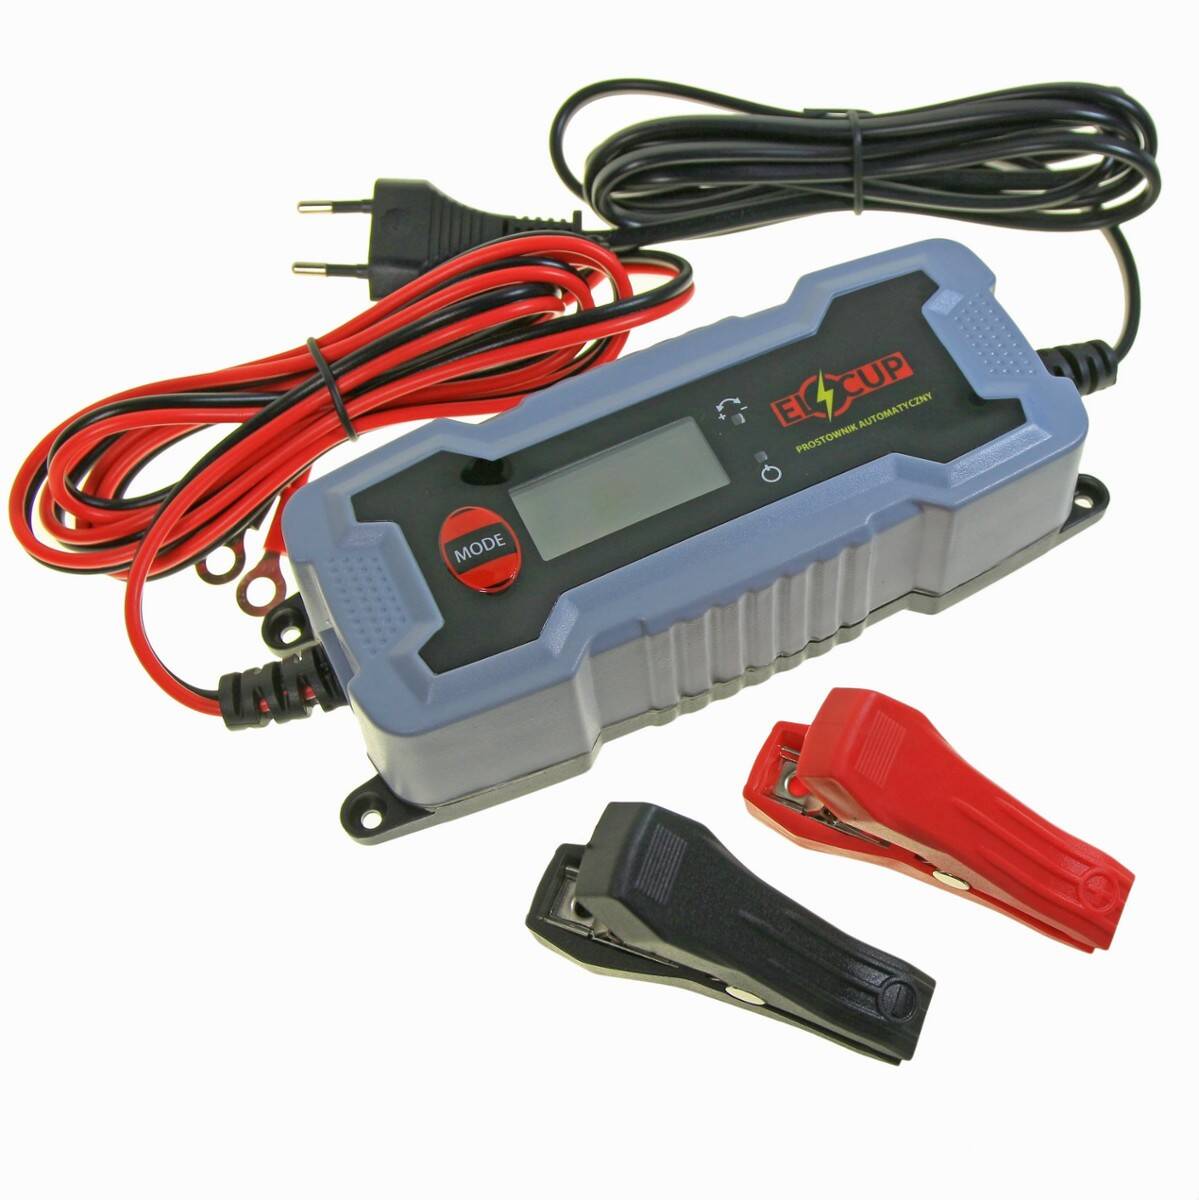 SMART BATTERY CHARGER 0.8A/3.8A (MAX 5A) 6V/12V LCD DISPLAY